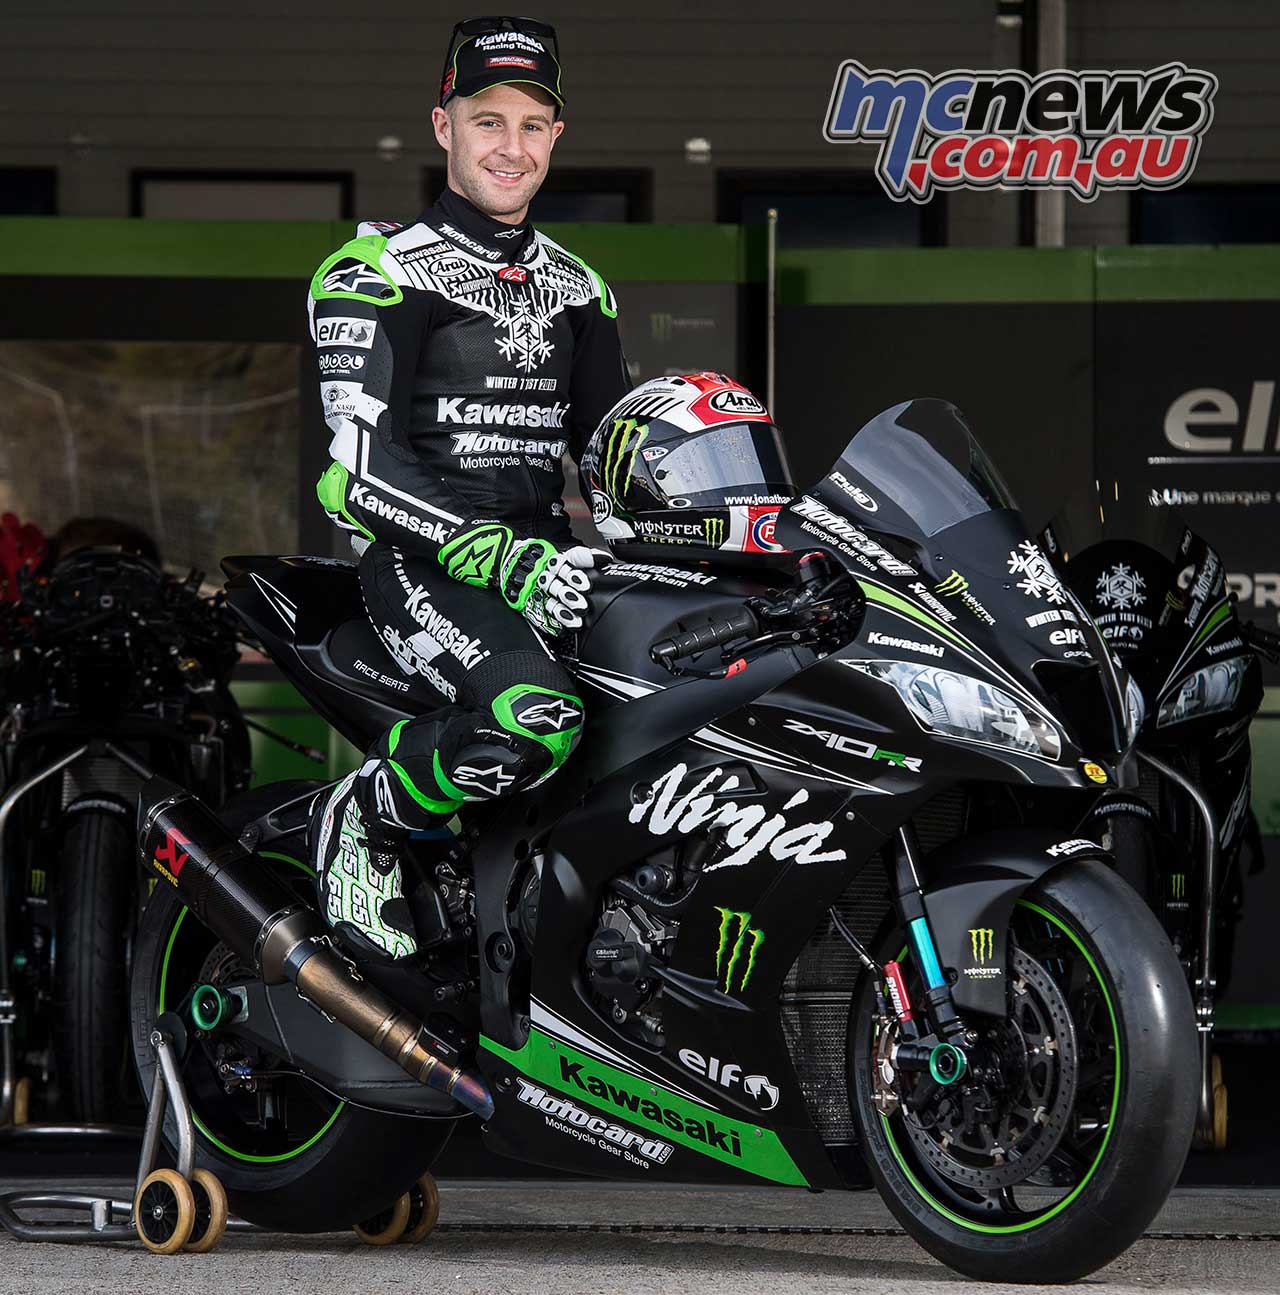 Kawasaki Head To Jerez Test Under New Wsbk Rules Motorcycle News Sport And Reviews